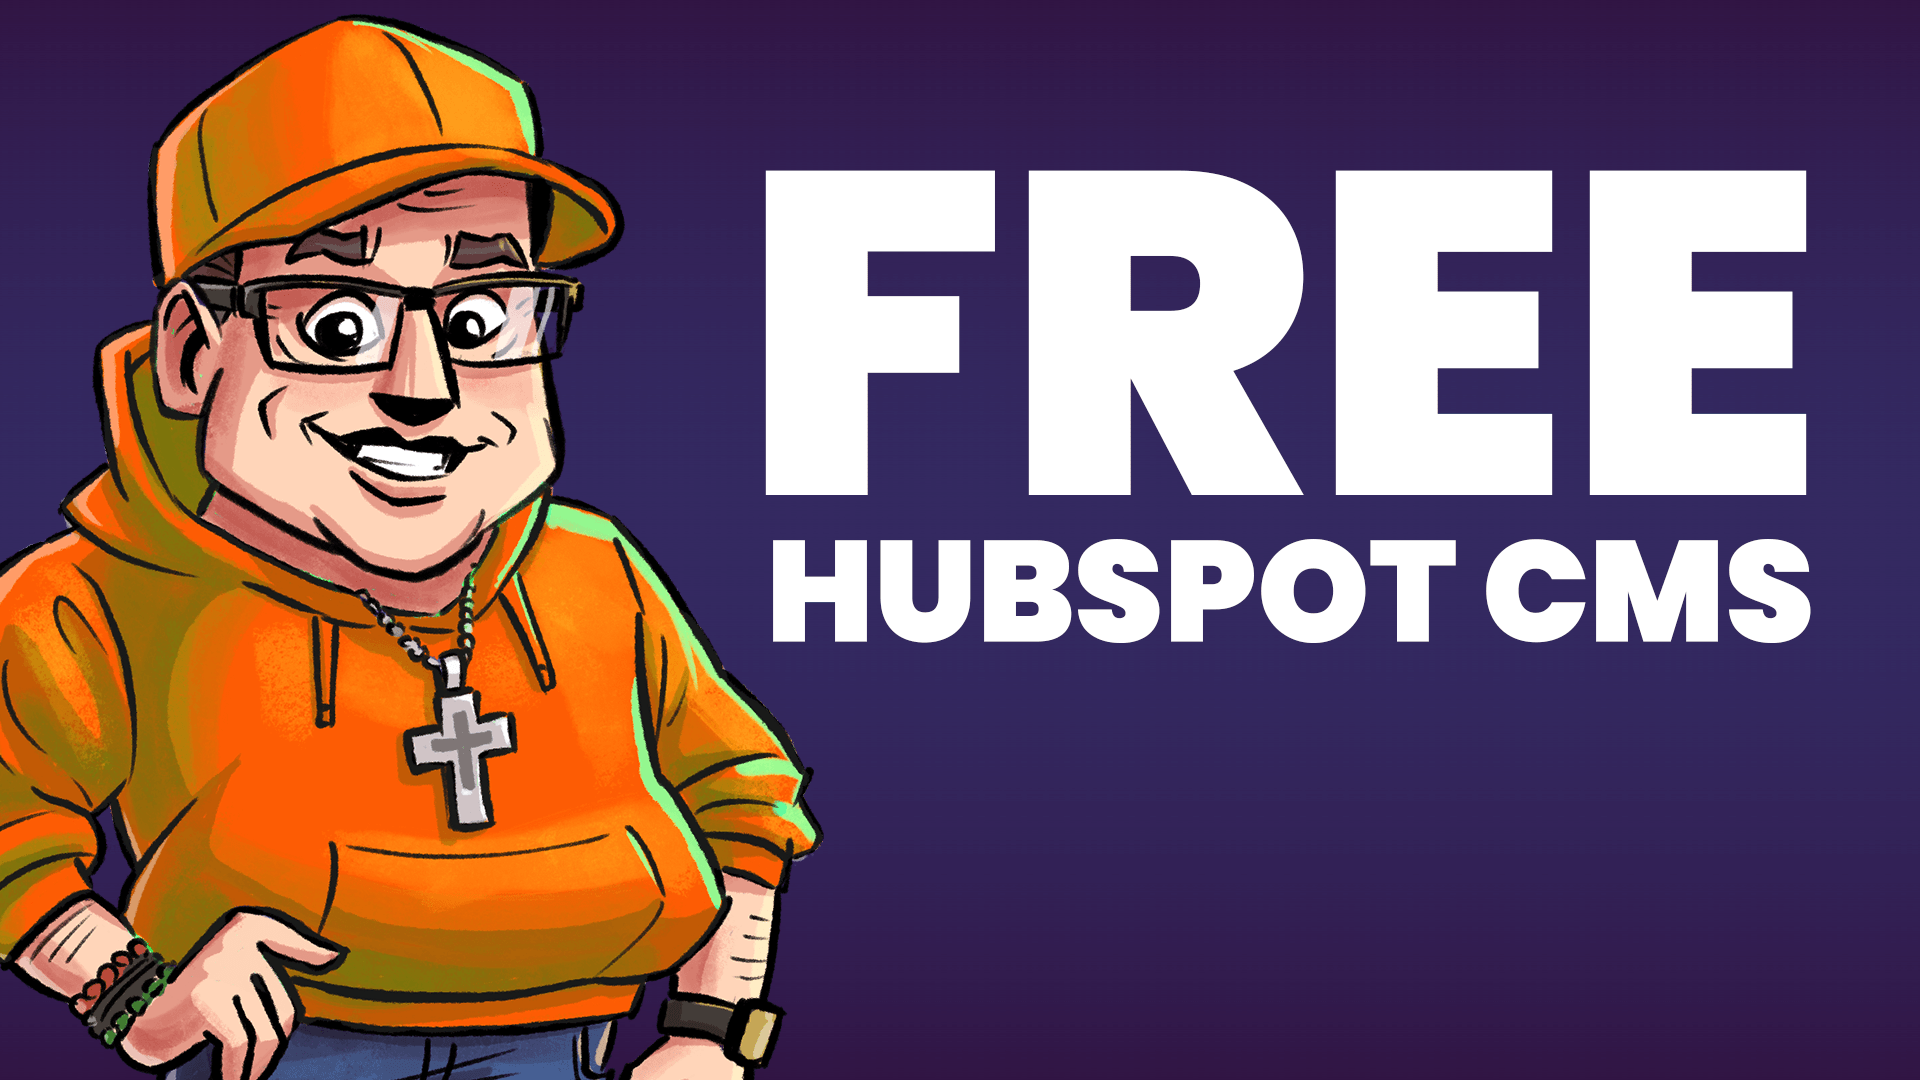 HubSpot CMS free setup how-to and limitations (video tutorial)